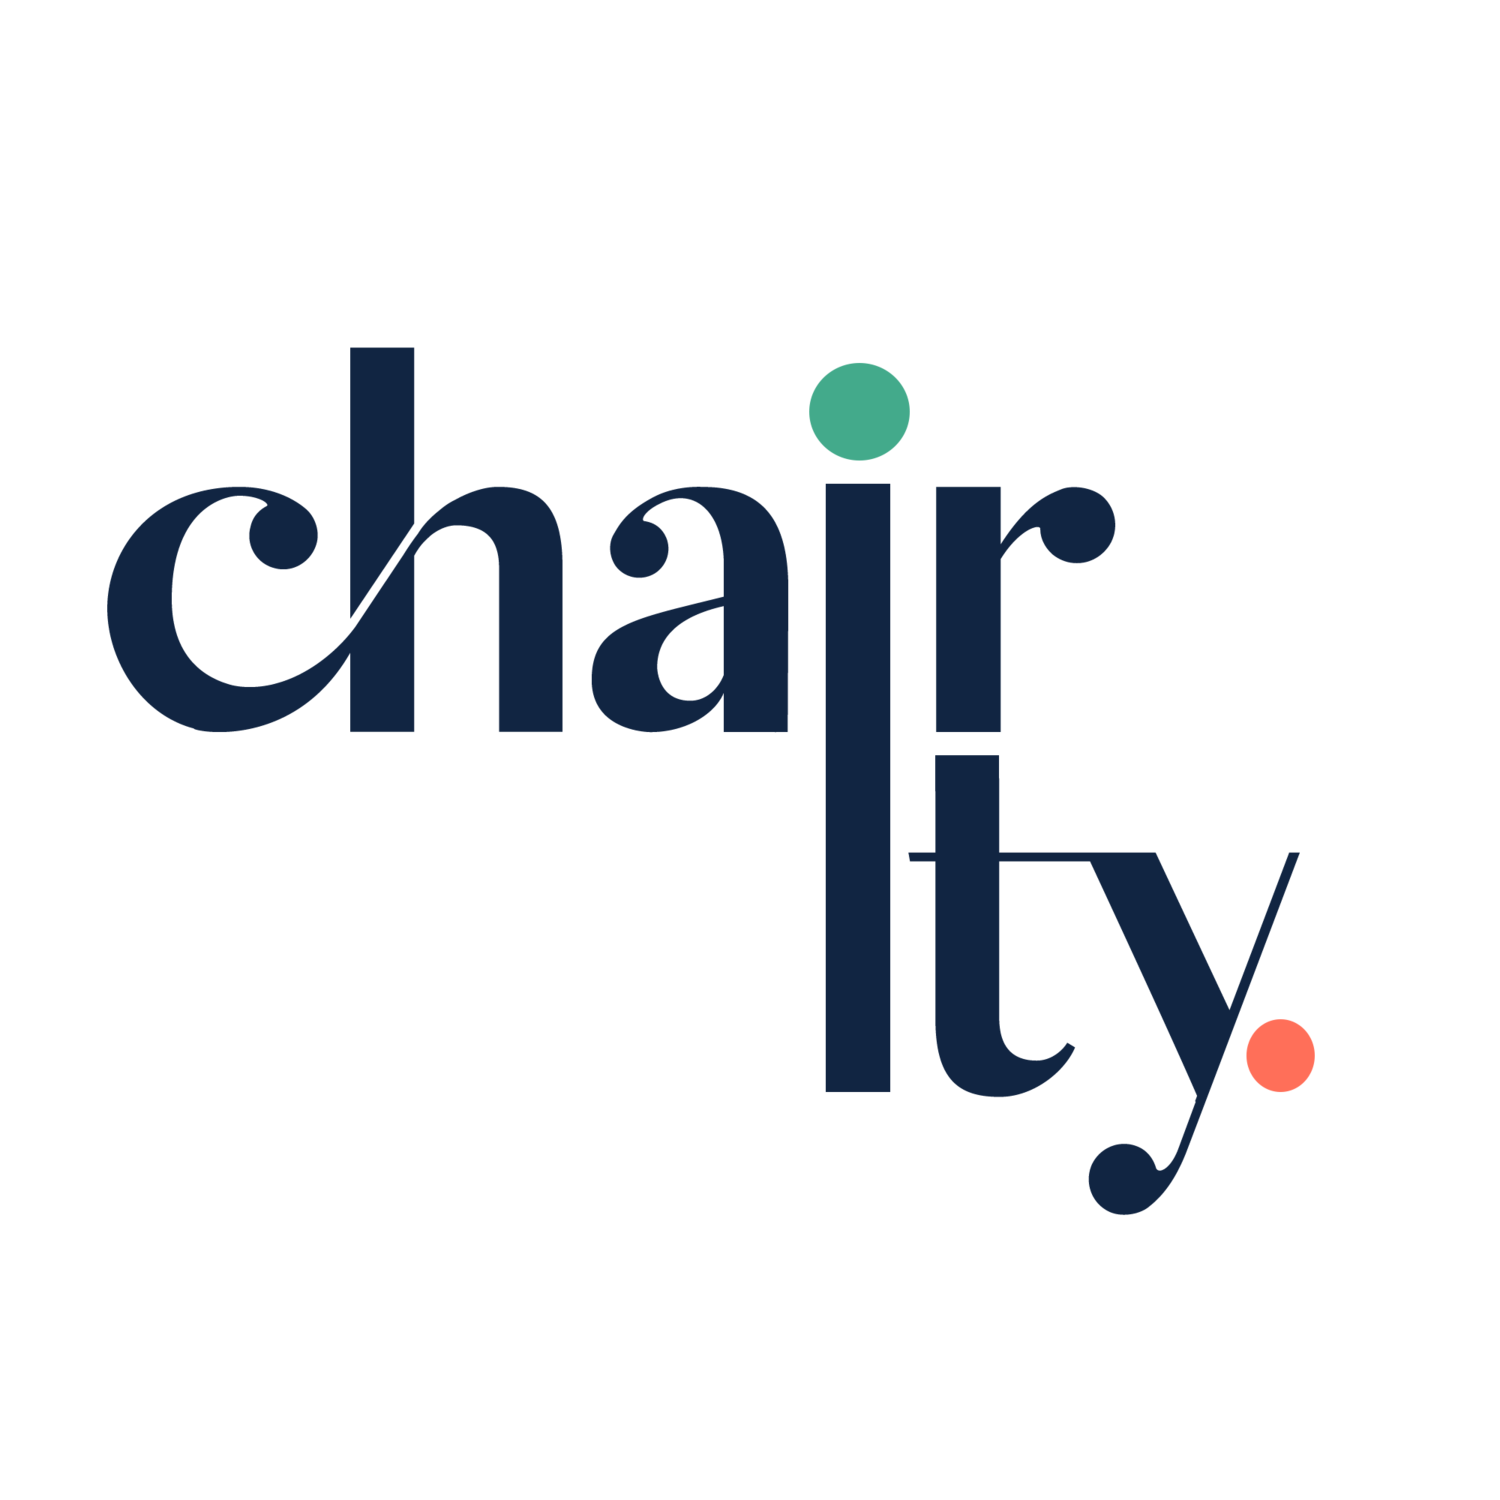 Chair-ity+stacked+final.png